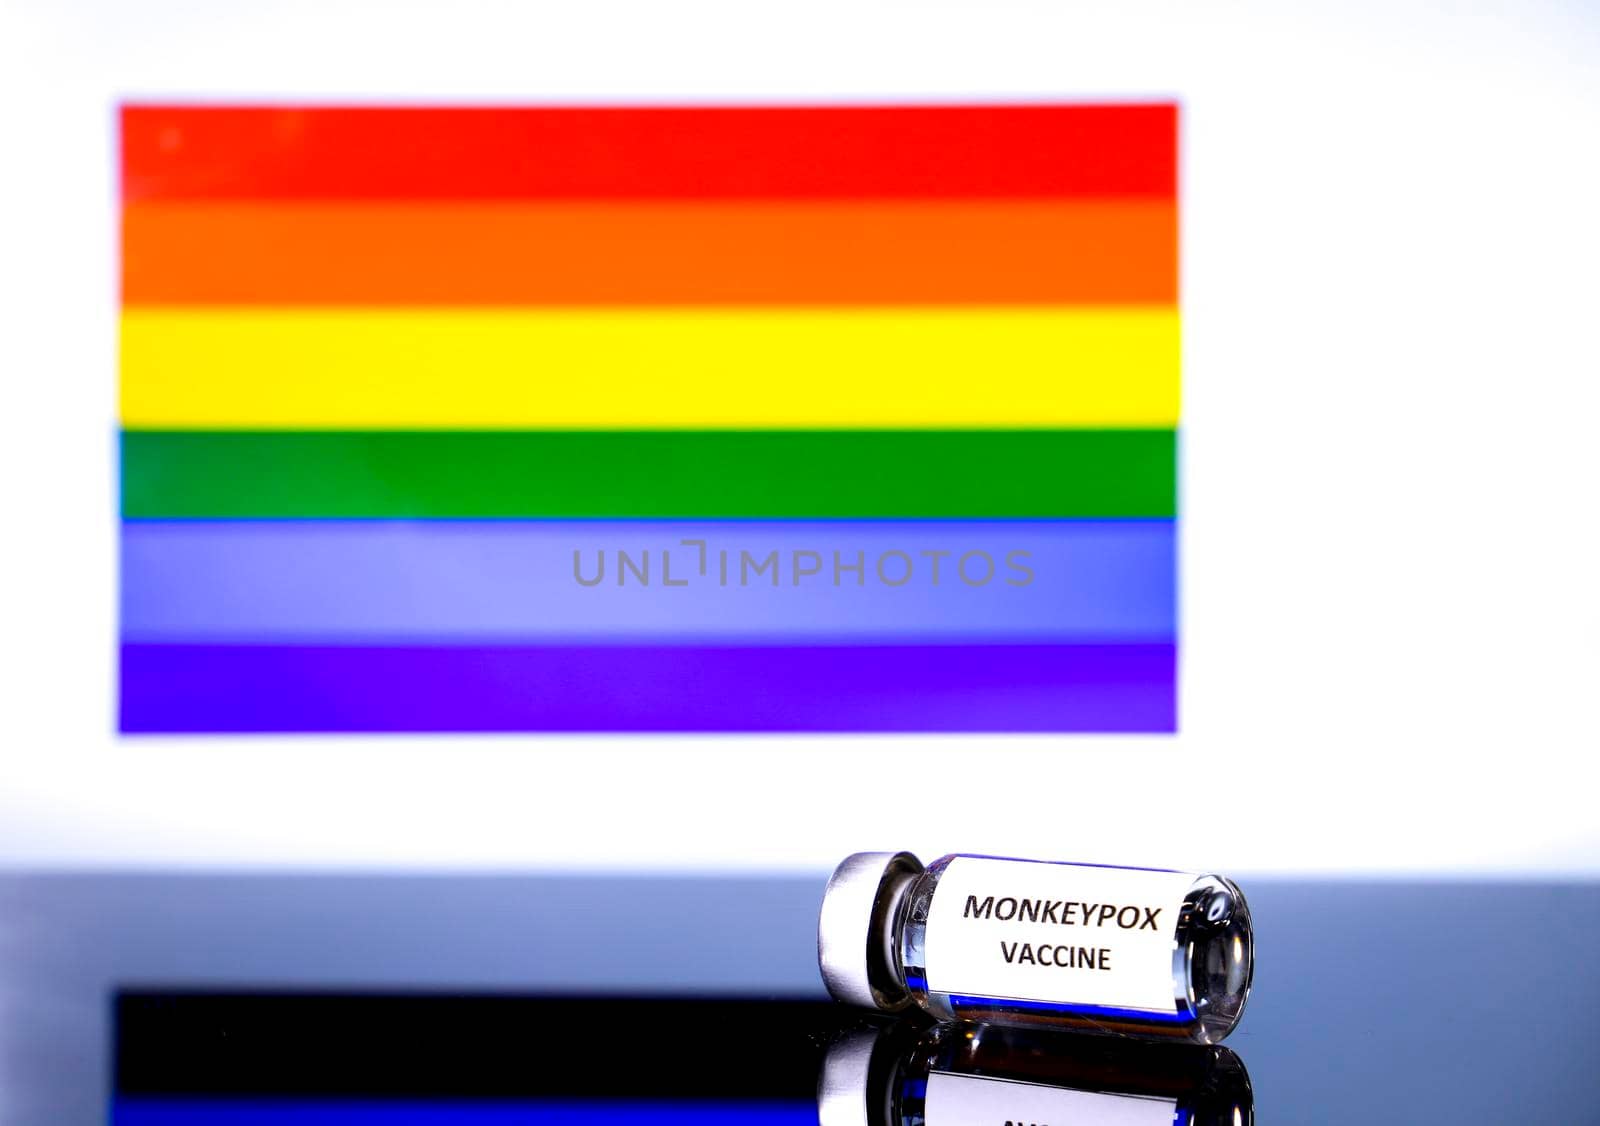 Vial with monkeypox vaccine and rainbow flag by soniabonet